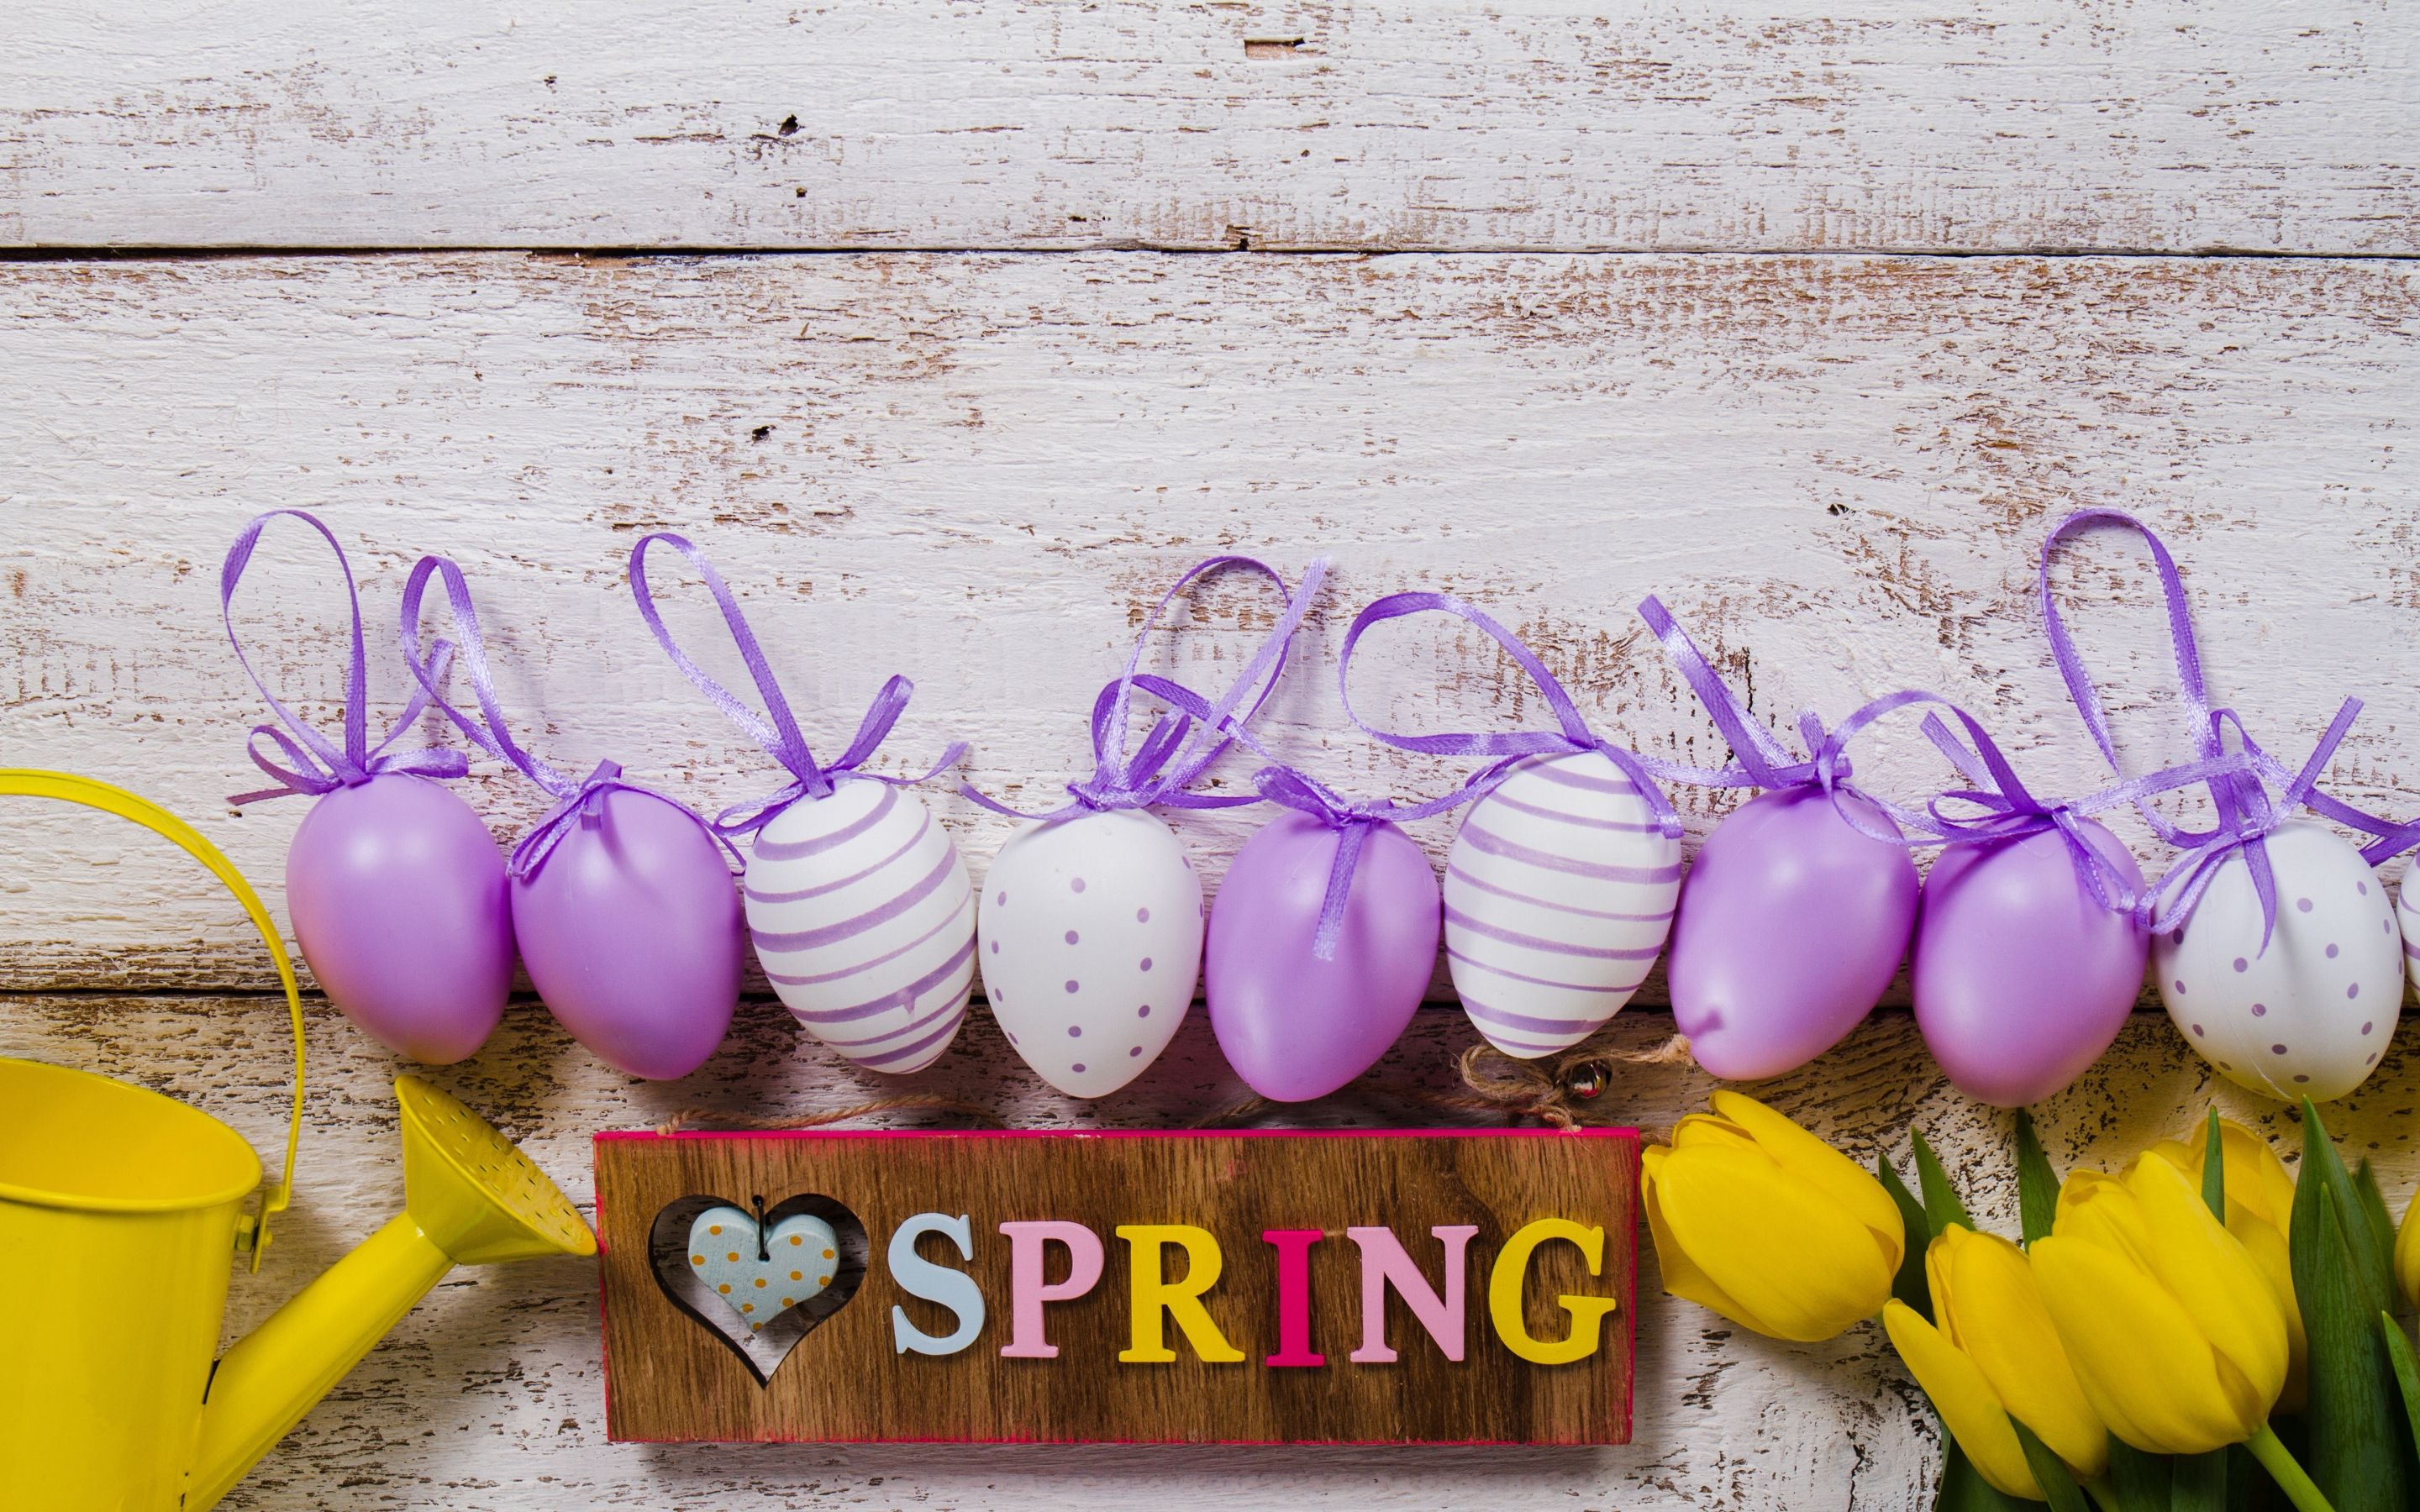 Spring, colorful, eggs, celebrations, tulips, 2880x1800 wallpaper